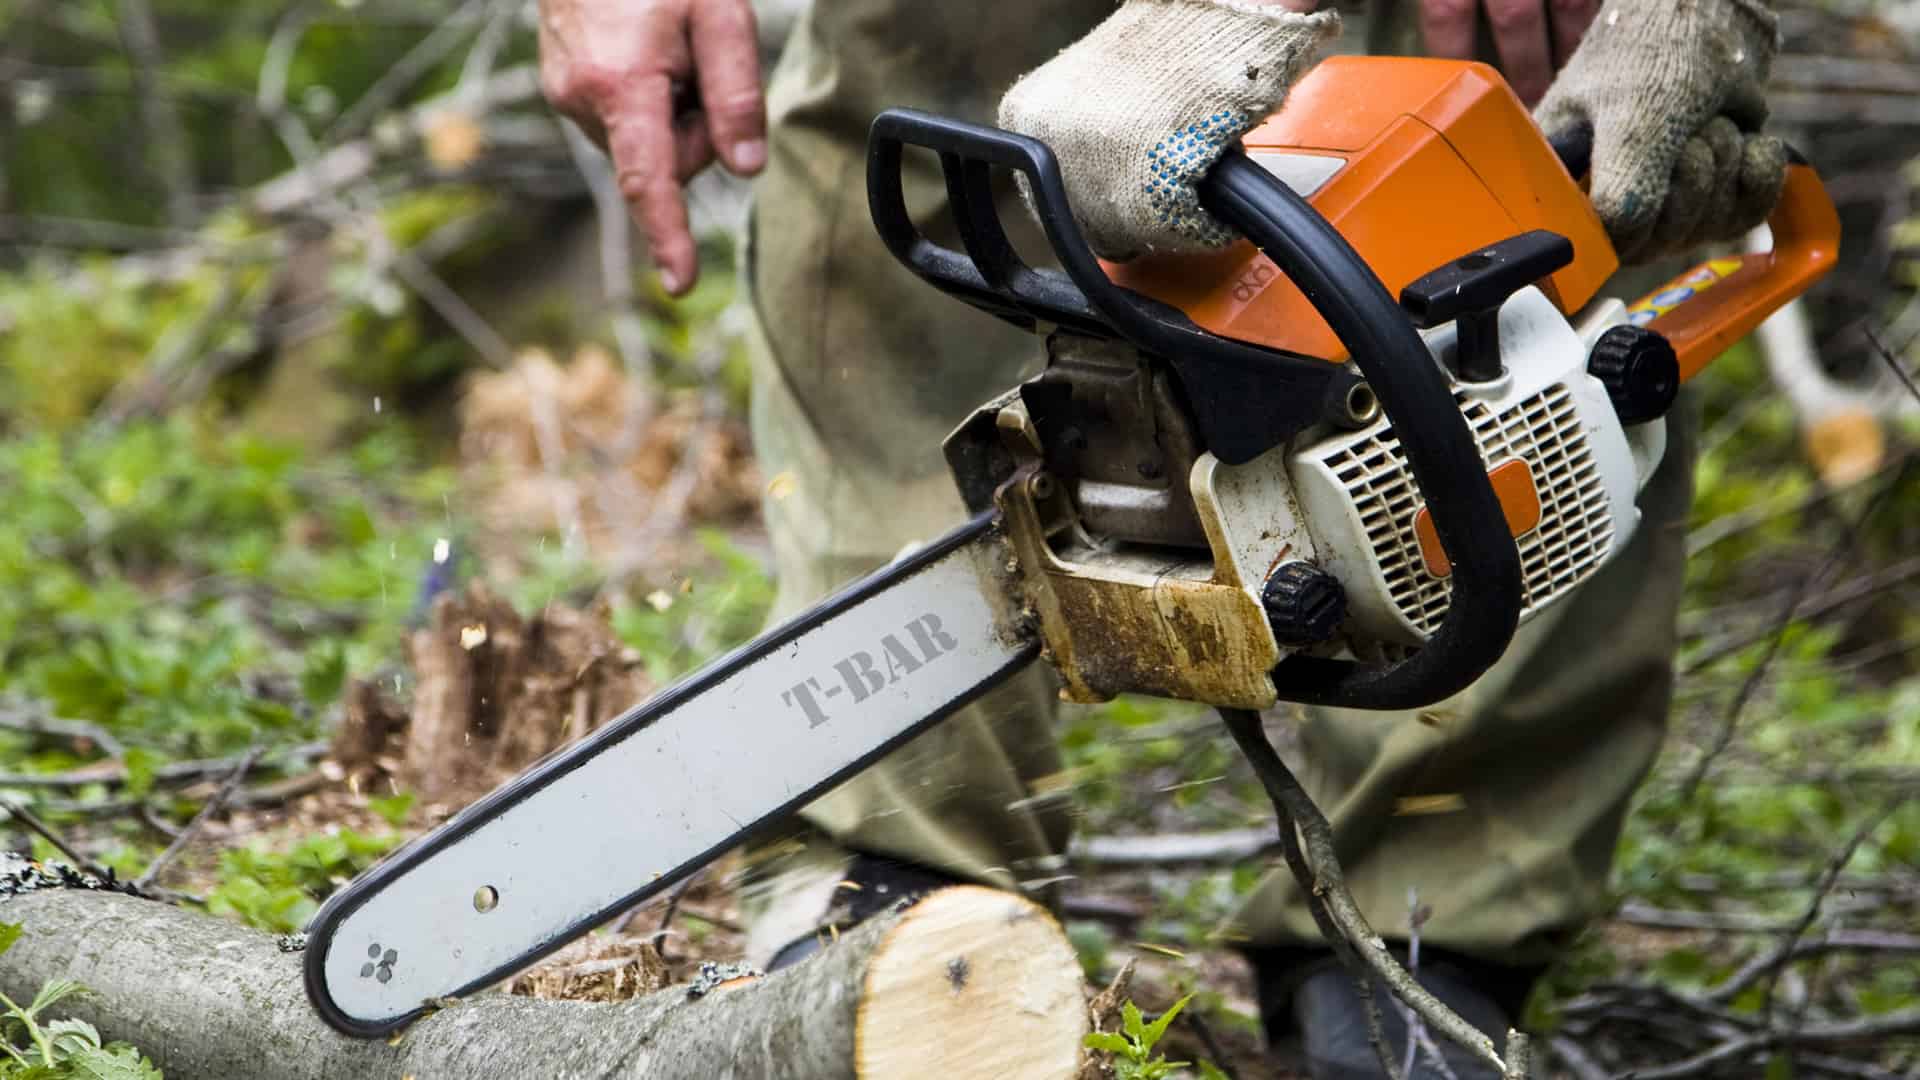 Chainsaw Operation and Safety